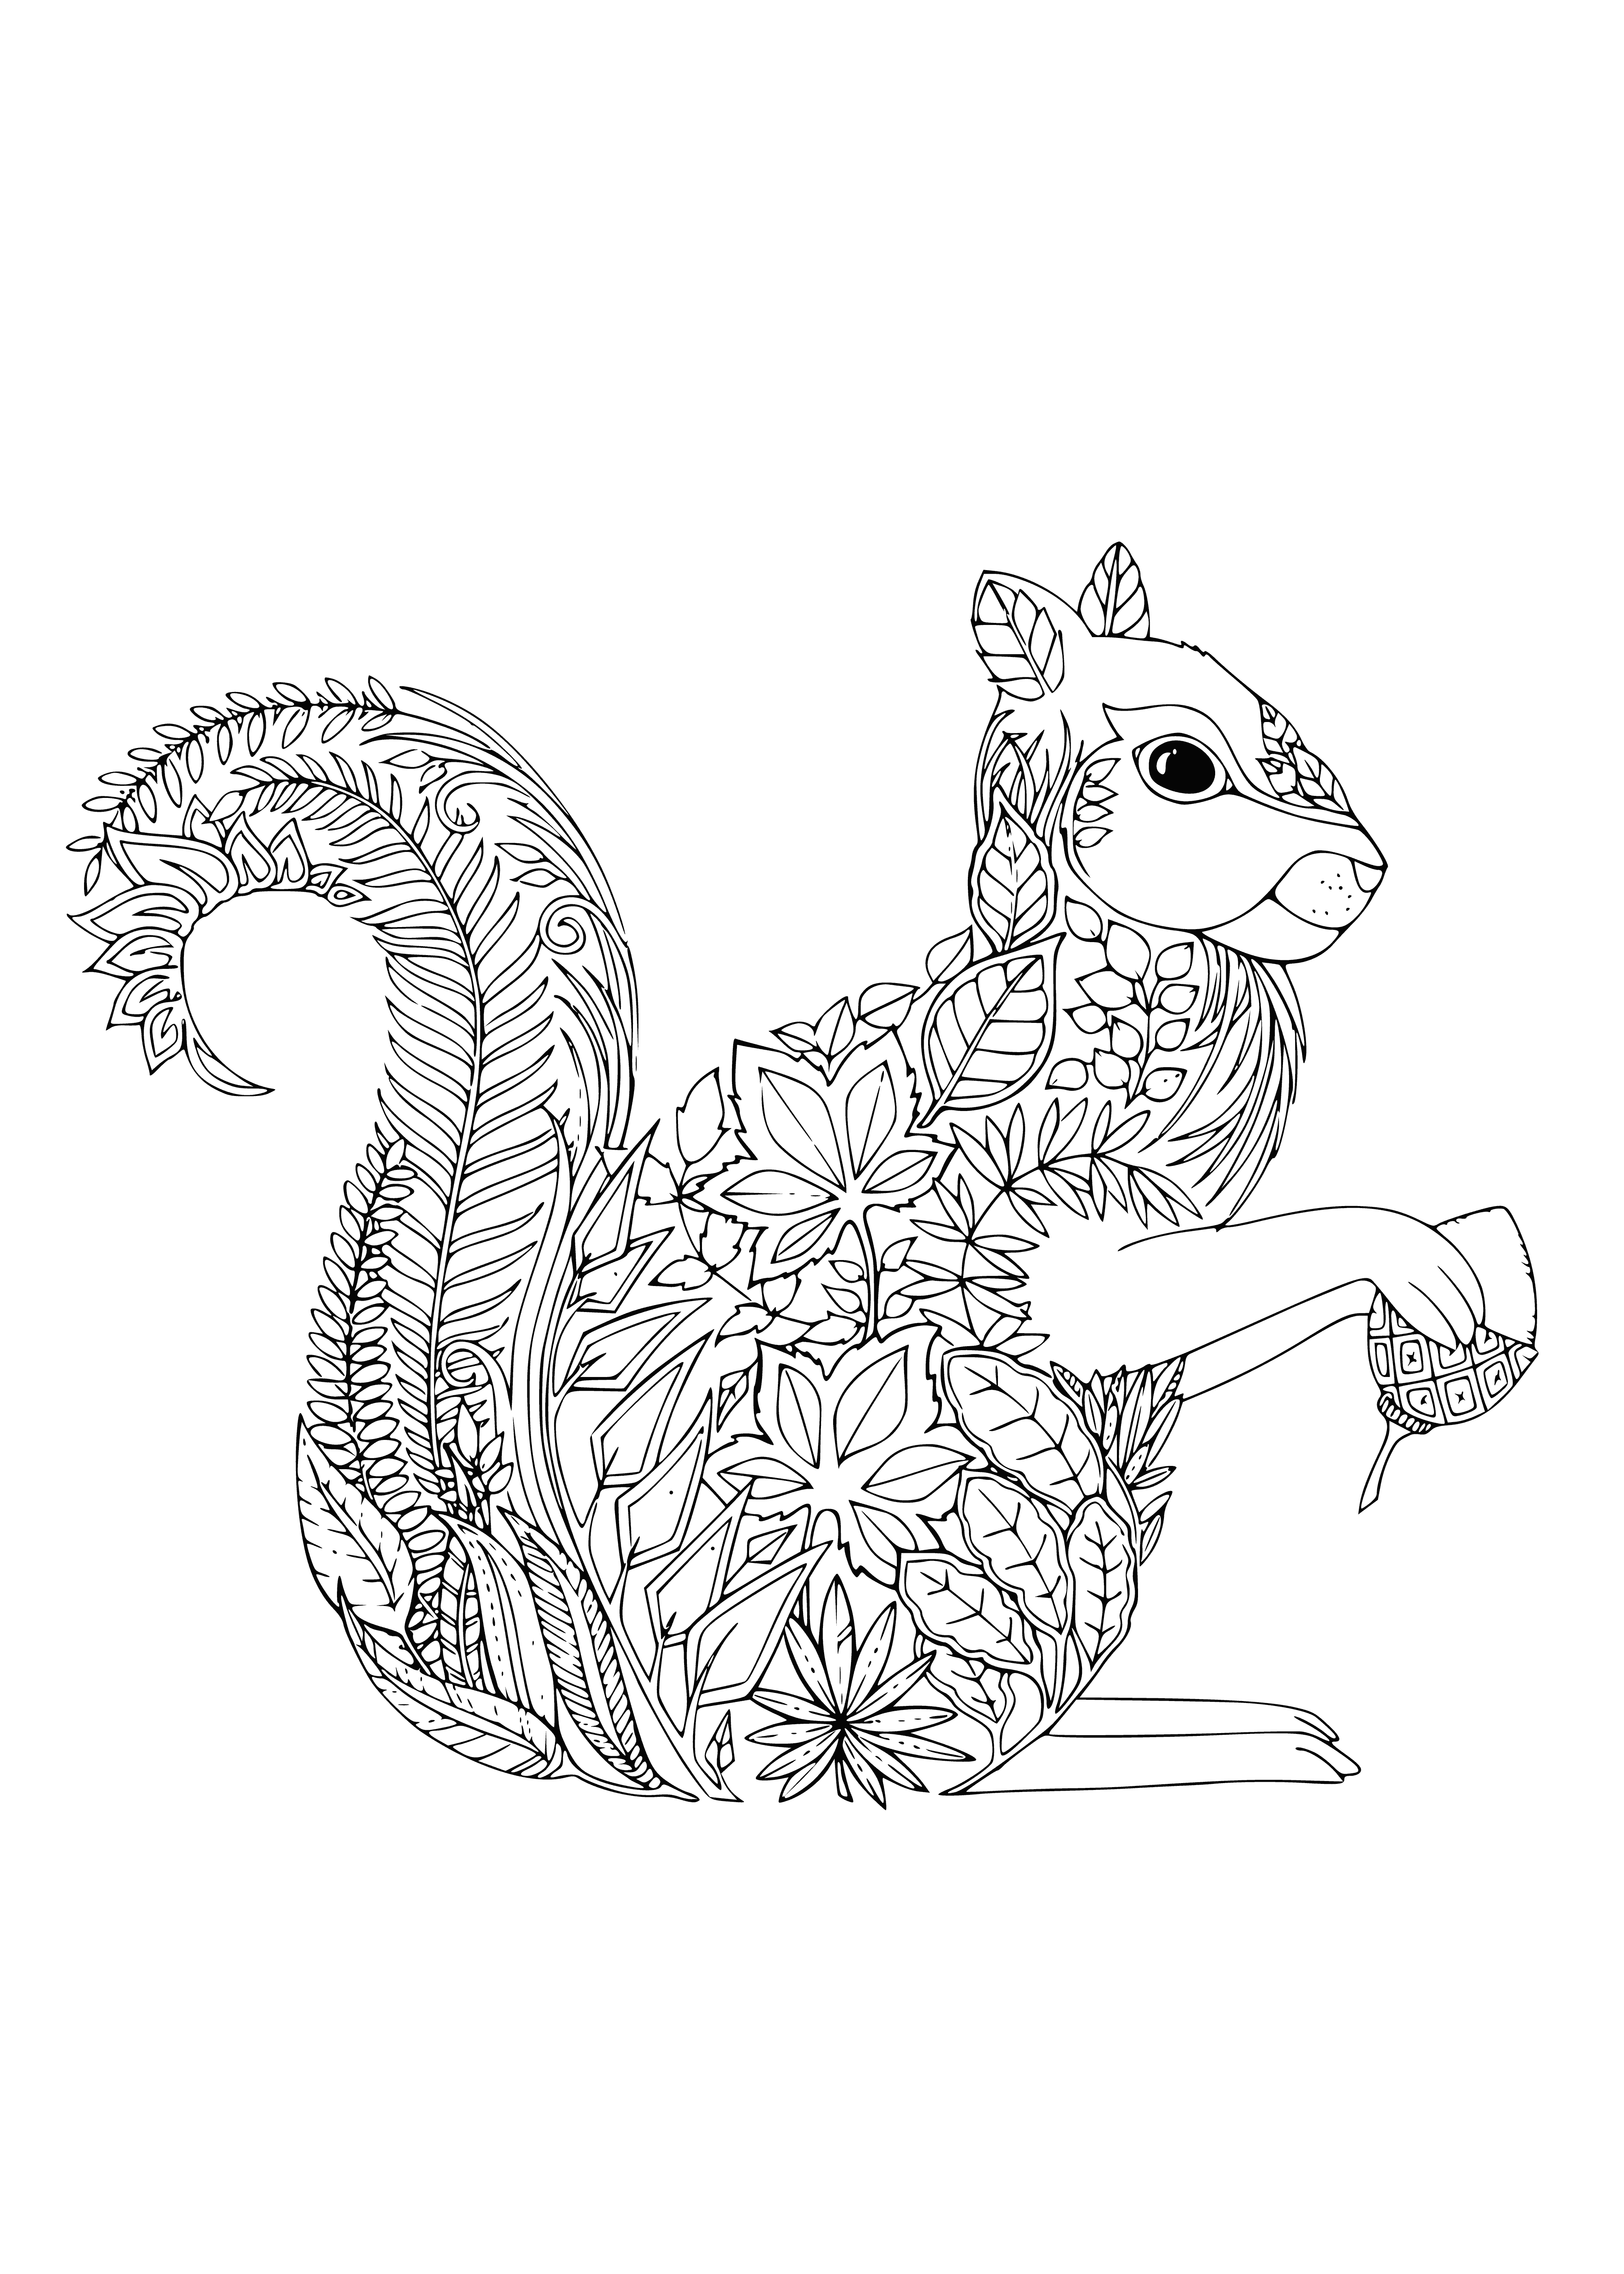 coloring page: Squirrel holding an acorn and surrounded by leaves and tree branches in a coloring page.